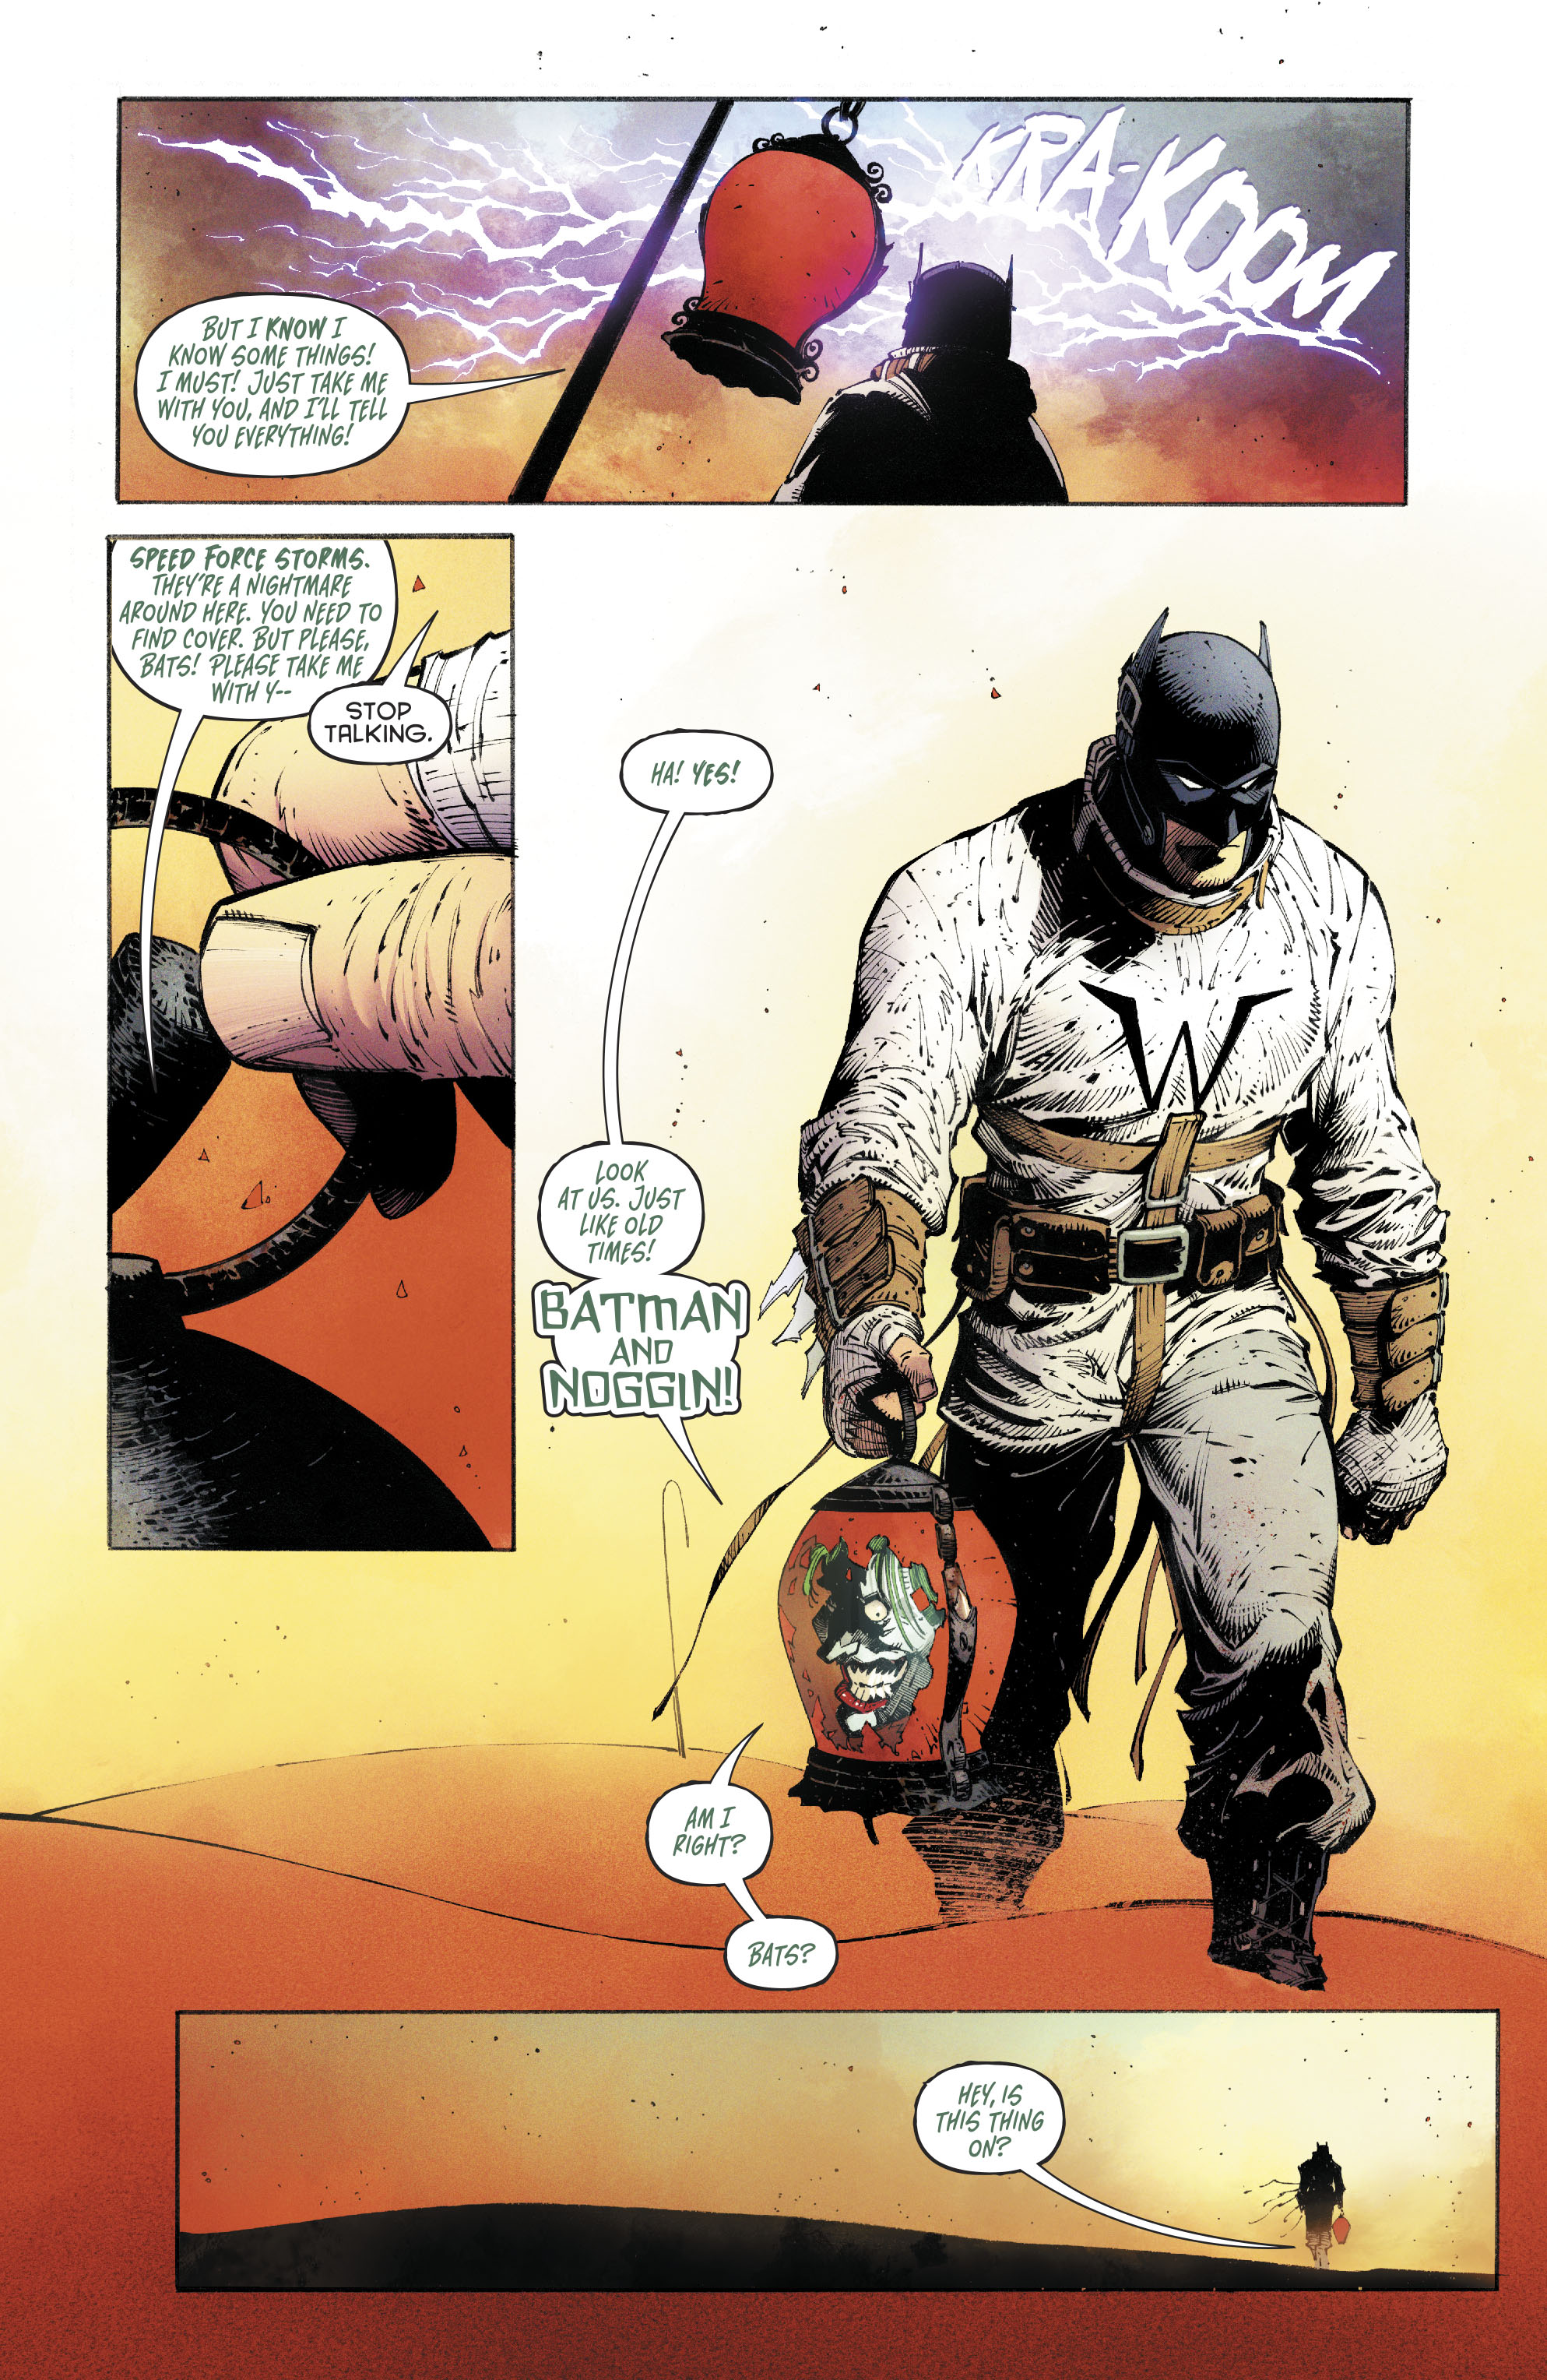 Batman: Last Knight on Earth (2019) Chapter 1 - Page 32